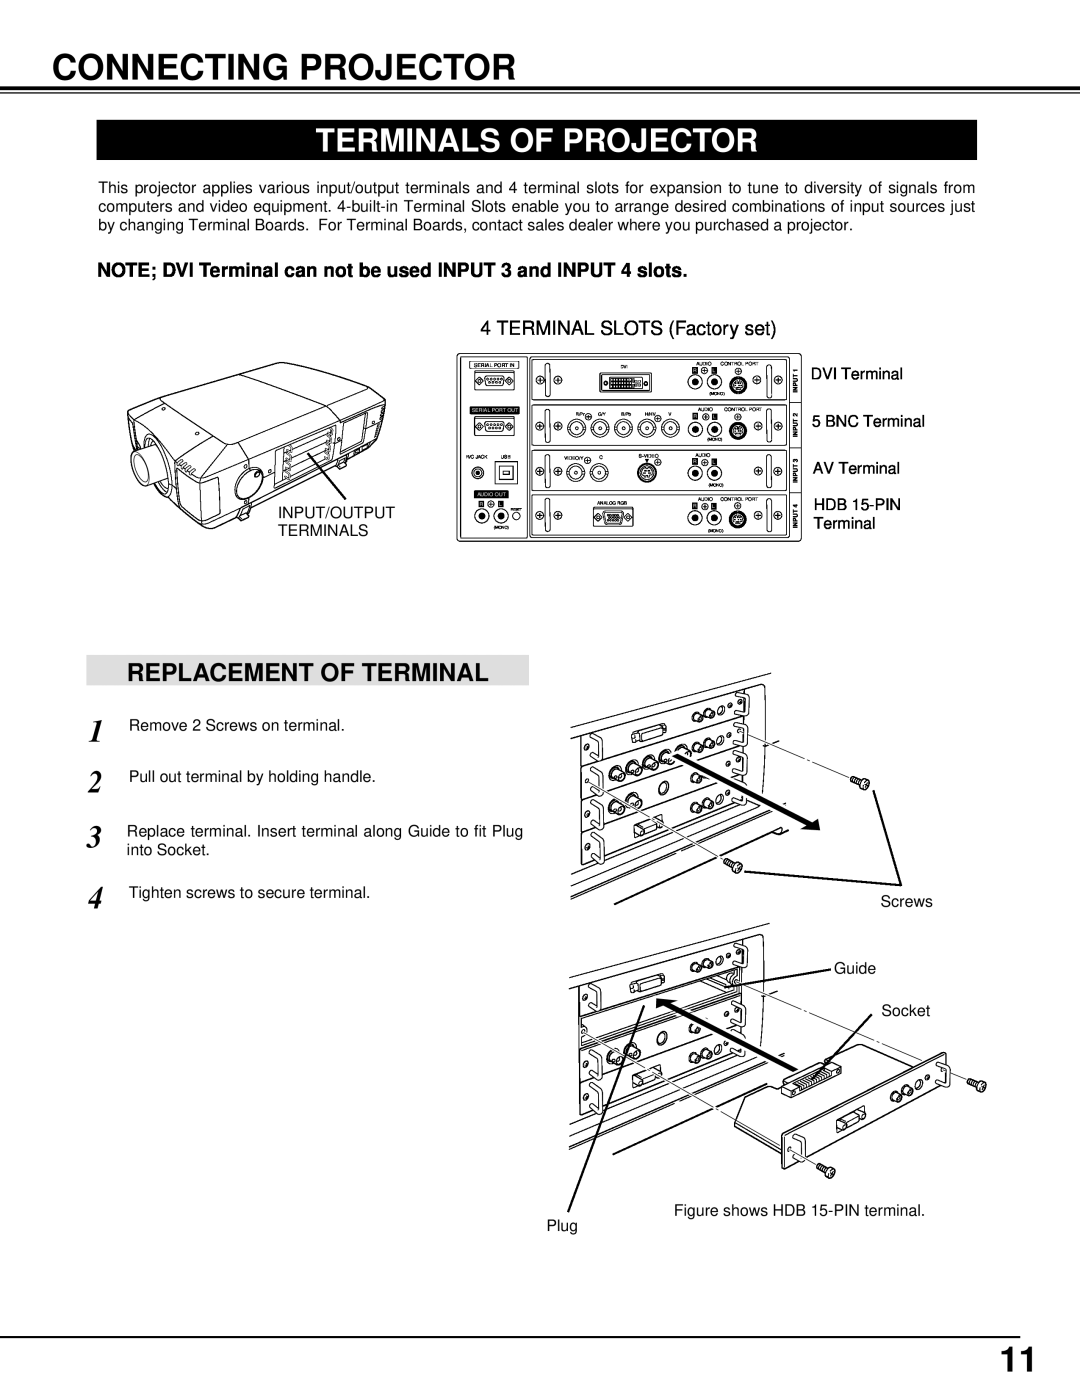 Eiki LC-XT2 instruction manual Connecting Projector, Terminals Of Projector, TERMINAL SLOTS Factory set 